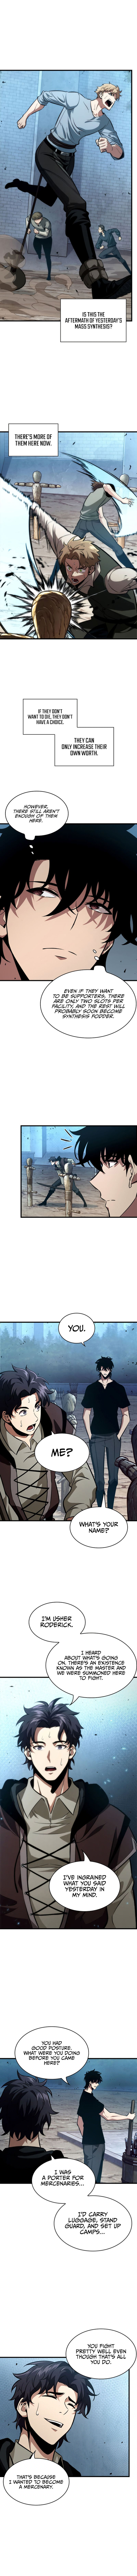 Pick Me Up Chapter 19 page 2